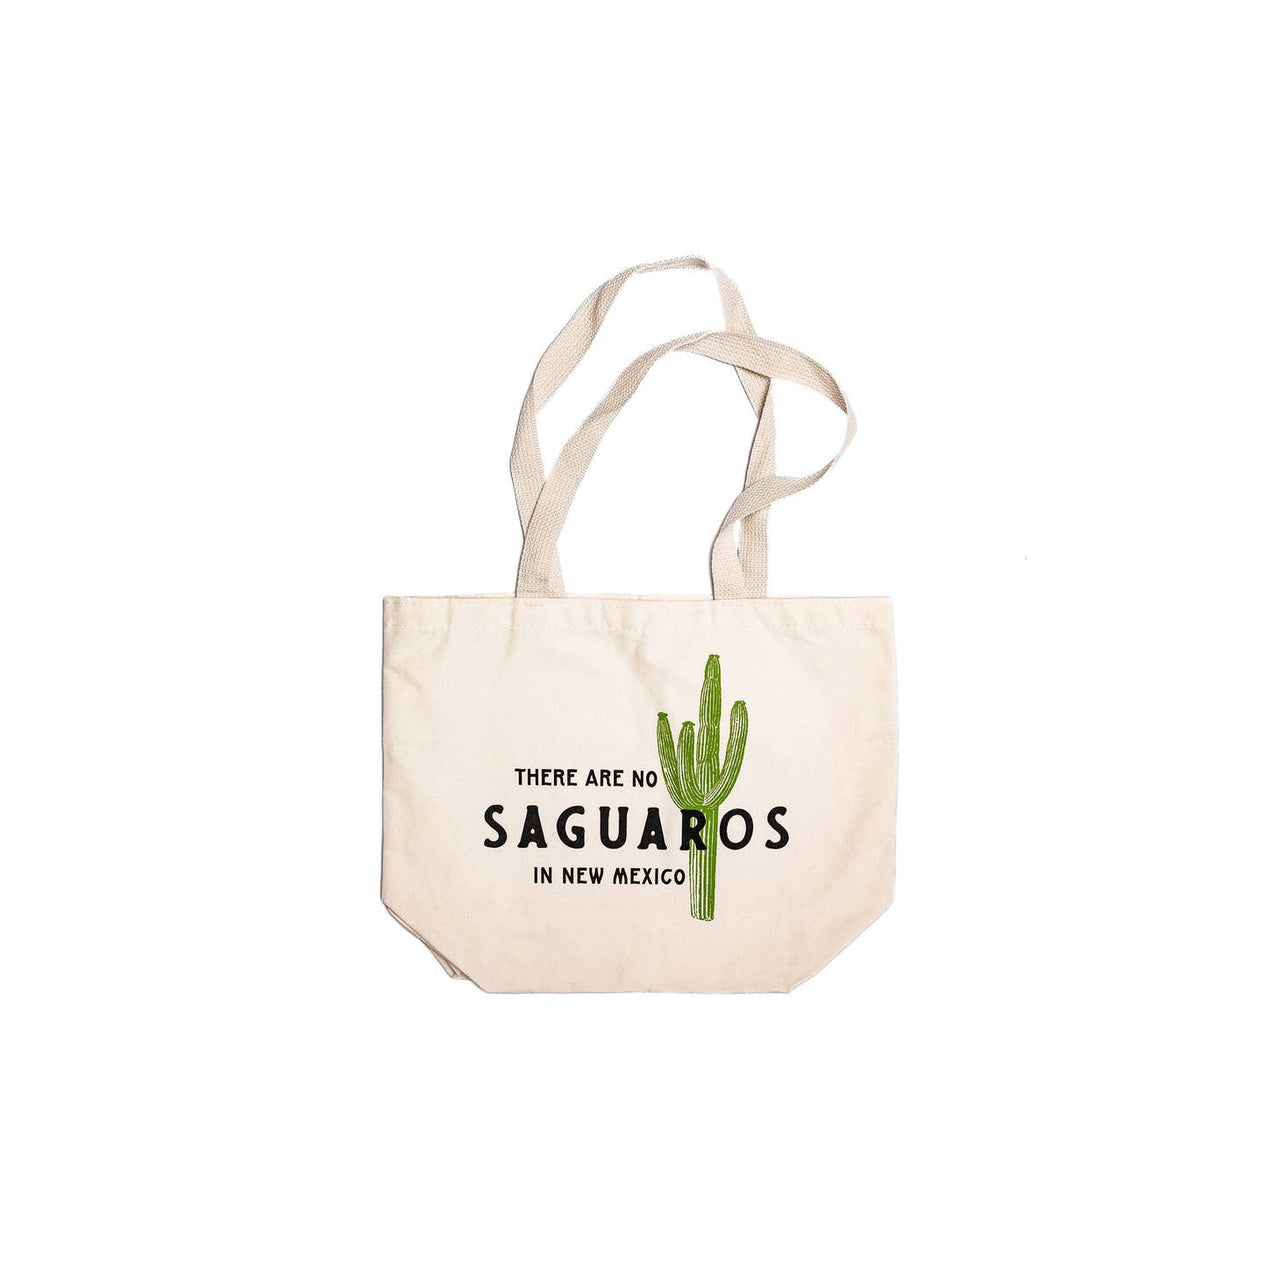 Power & Light Press - Tote - There Are No Saguaros in New Mexico